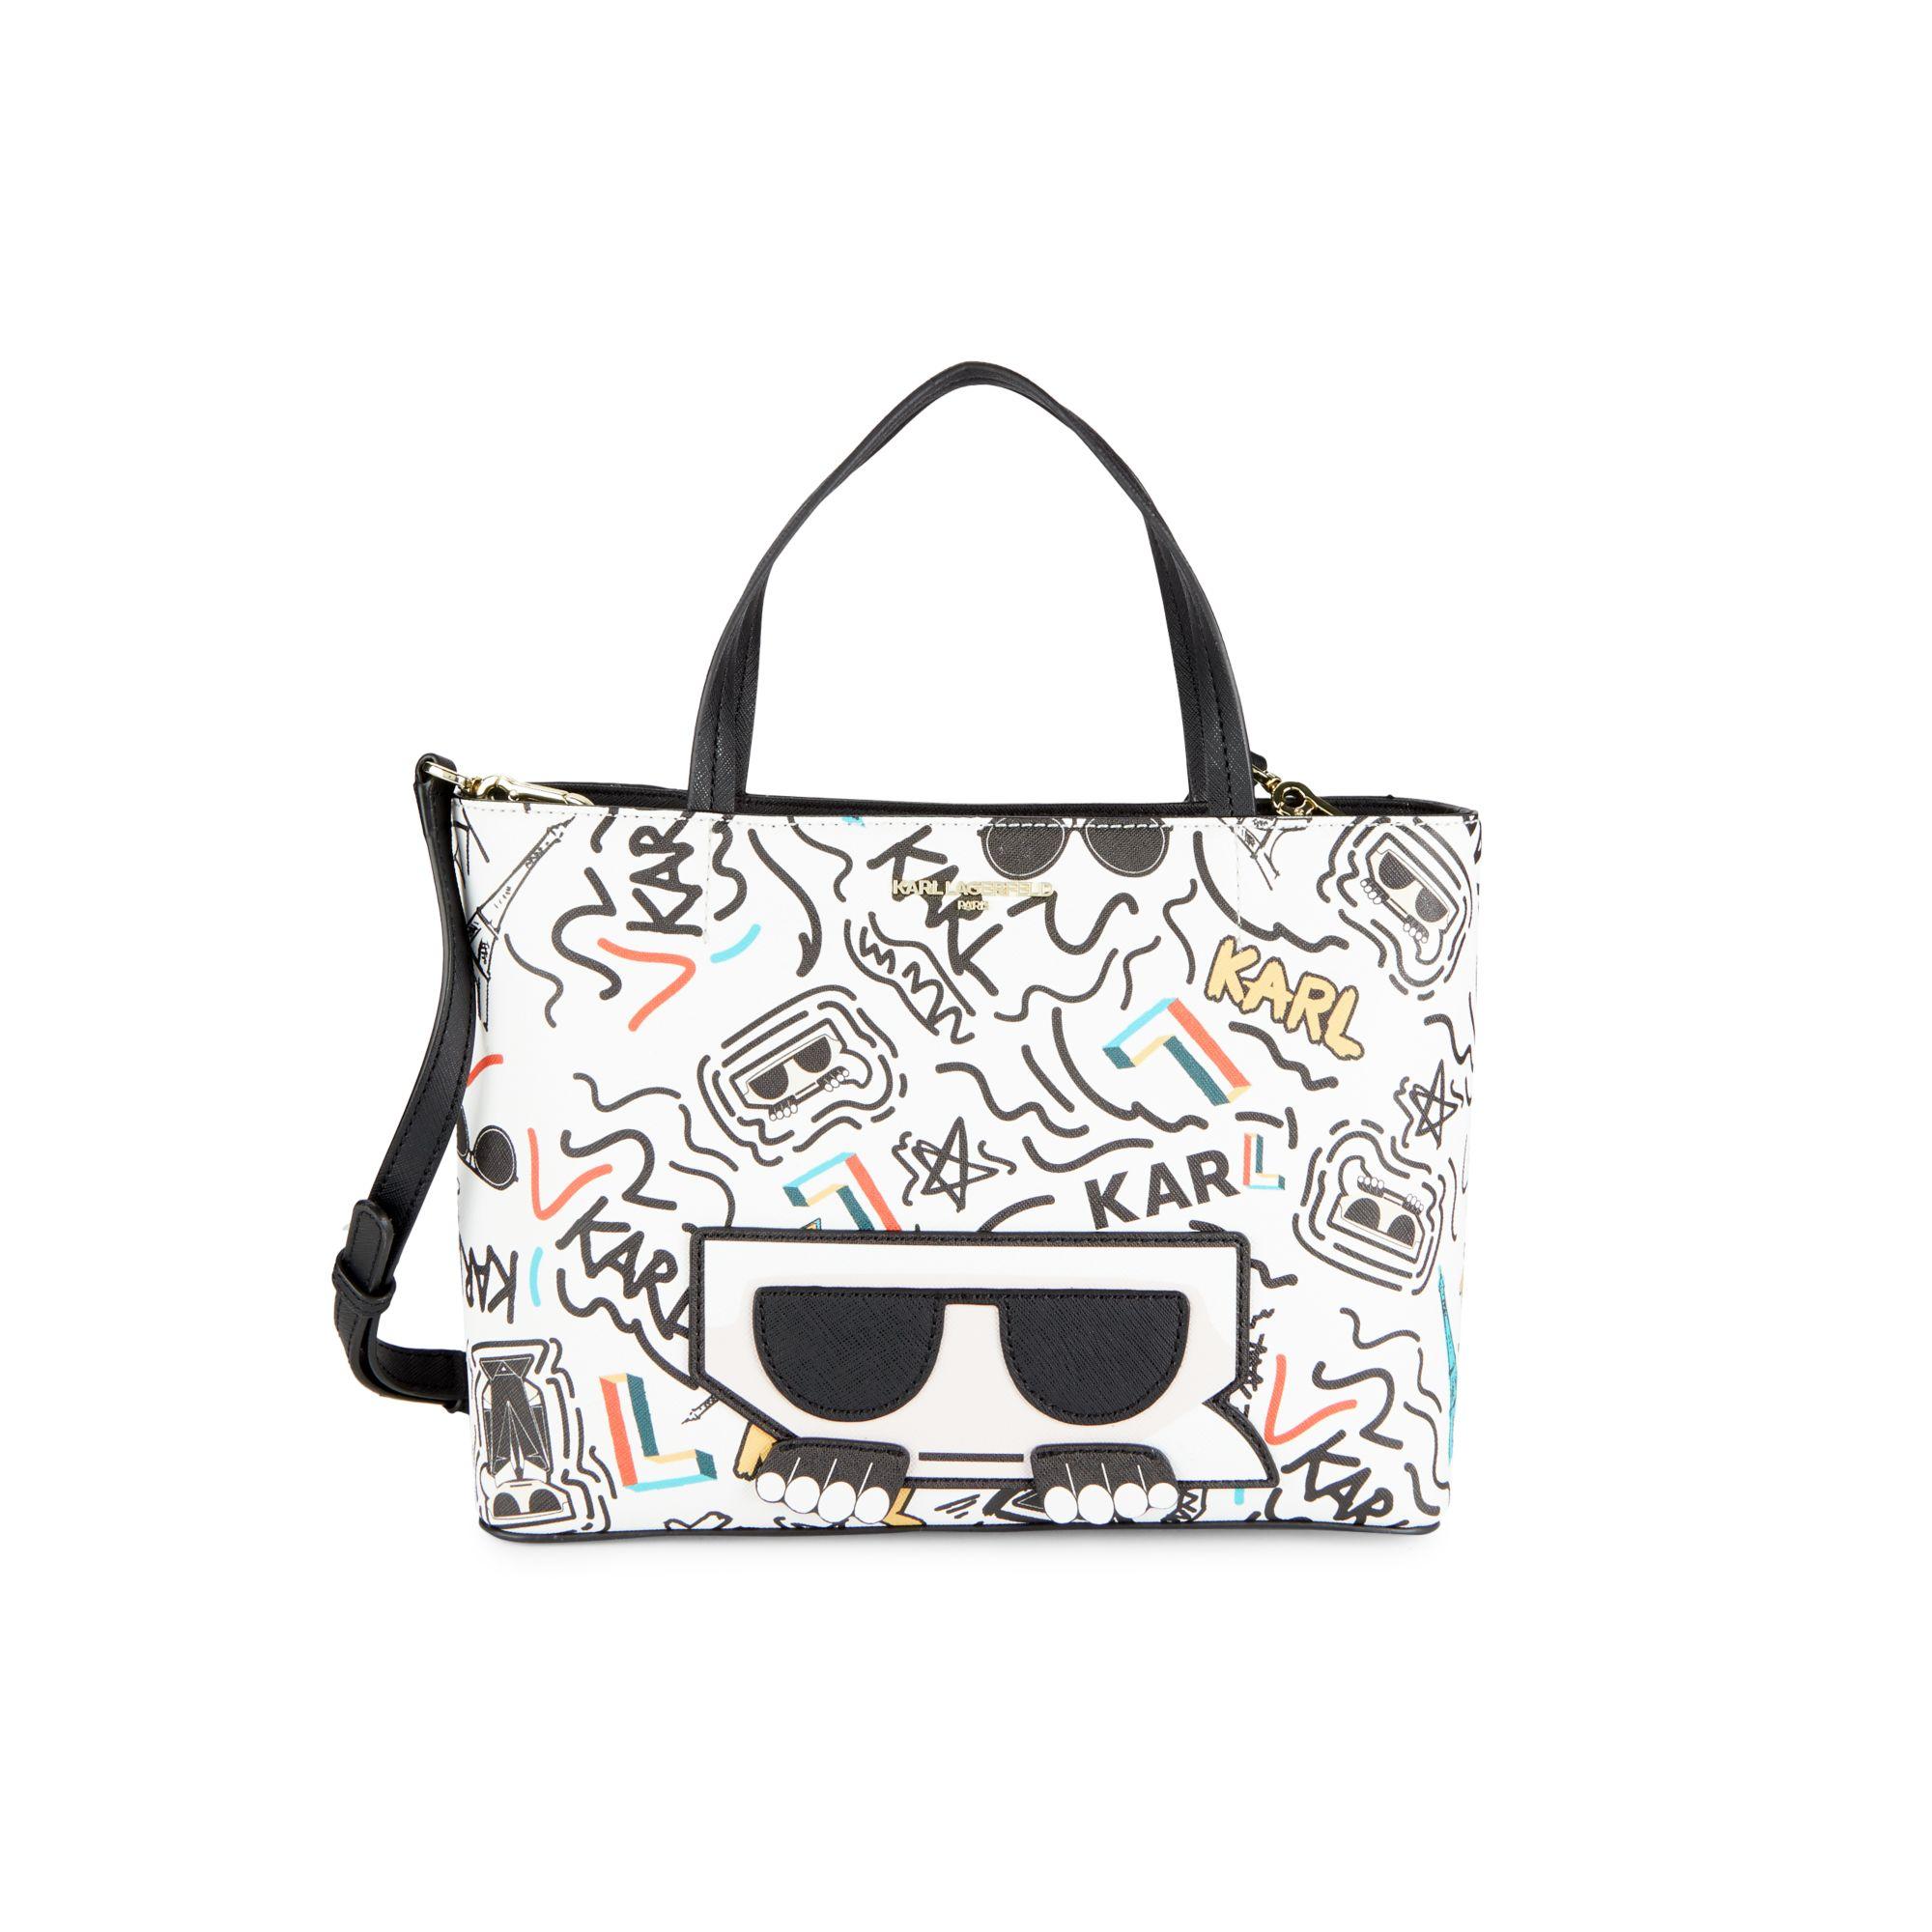 Karl Lagerfeld Maybelle Printed Tote in White - Lyst